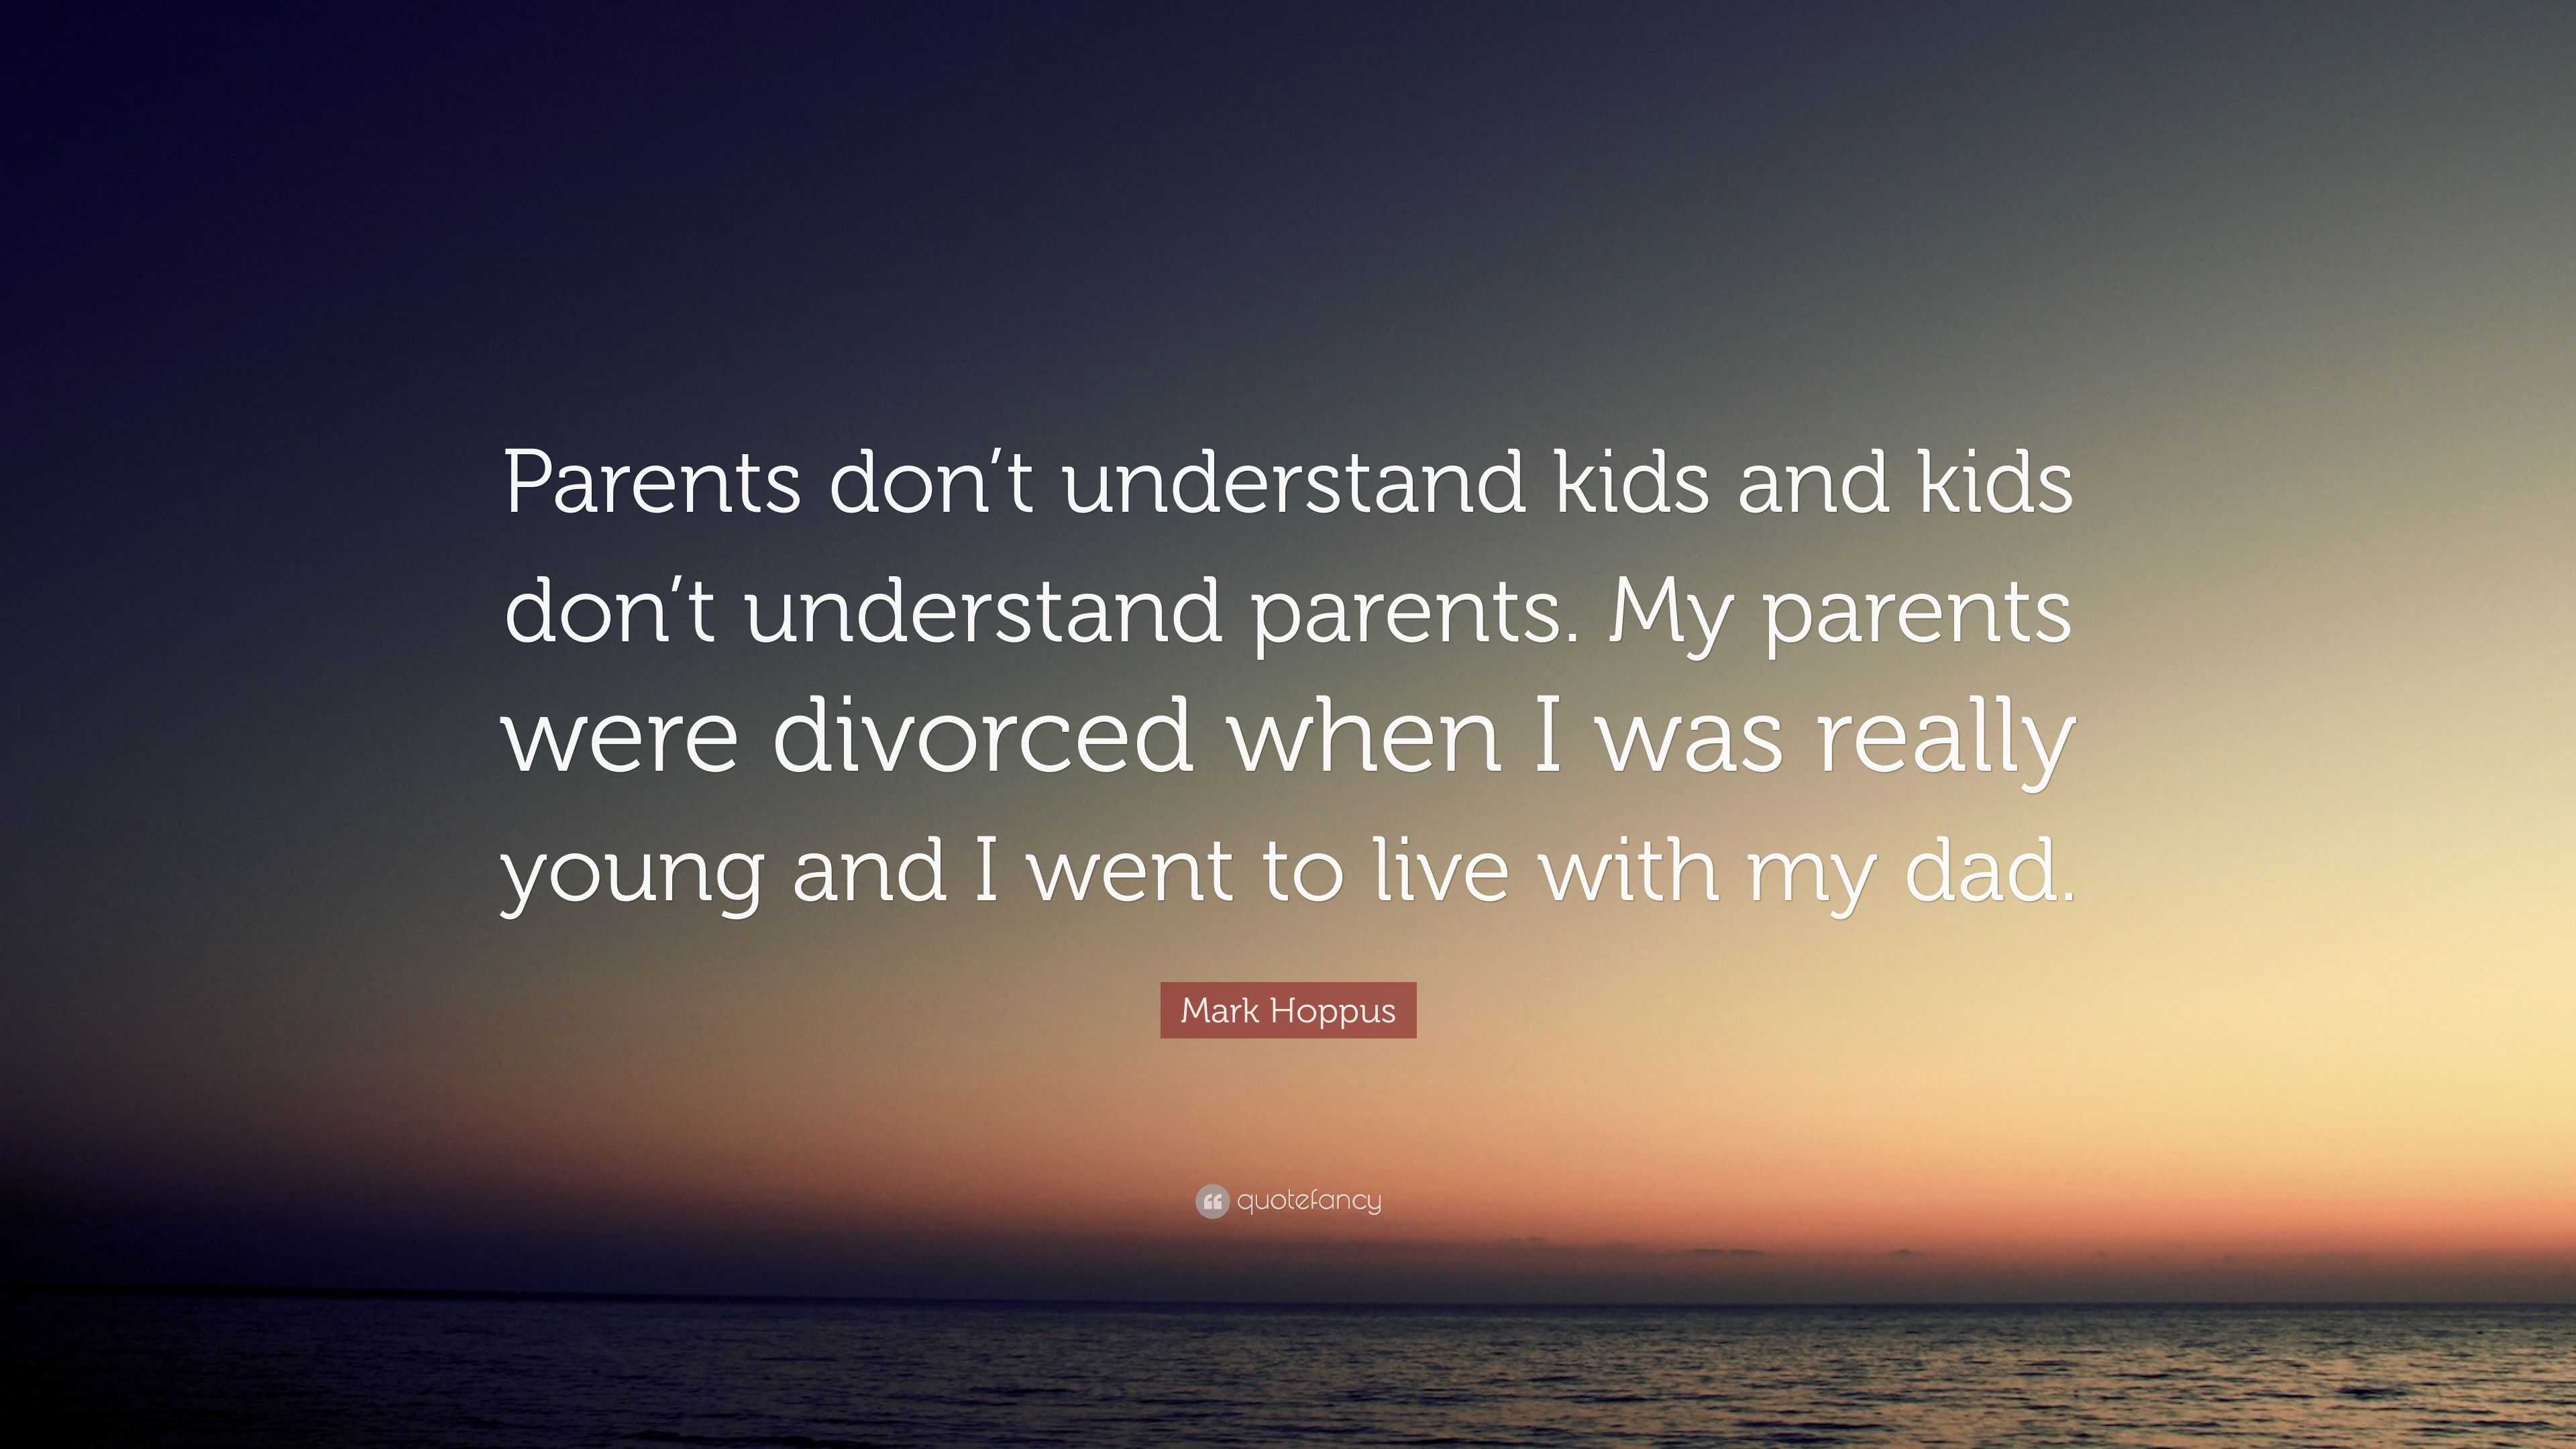 Mark Hoppus Quote: “Parents don’t understand kids and kids don’t ...